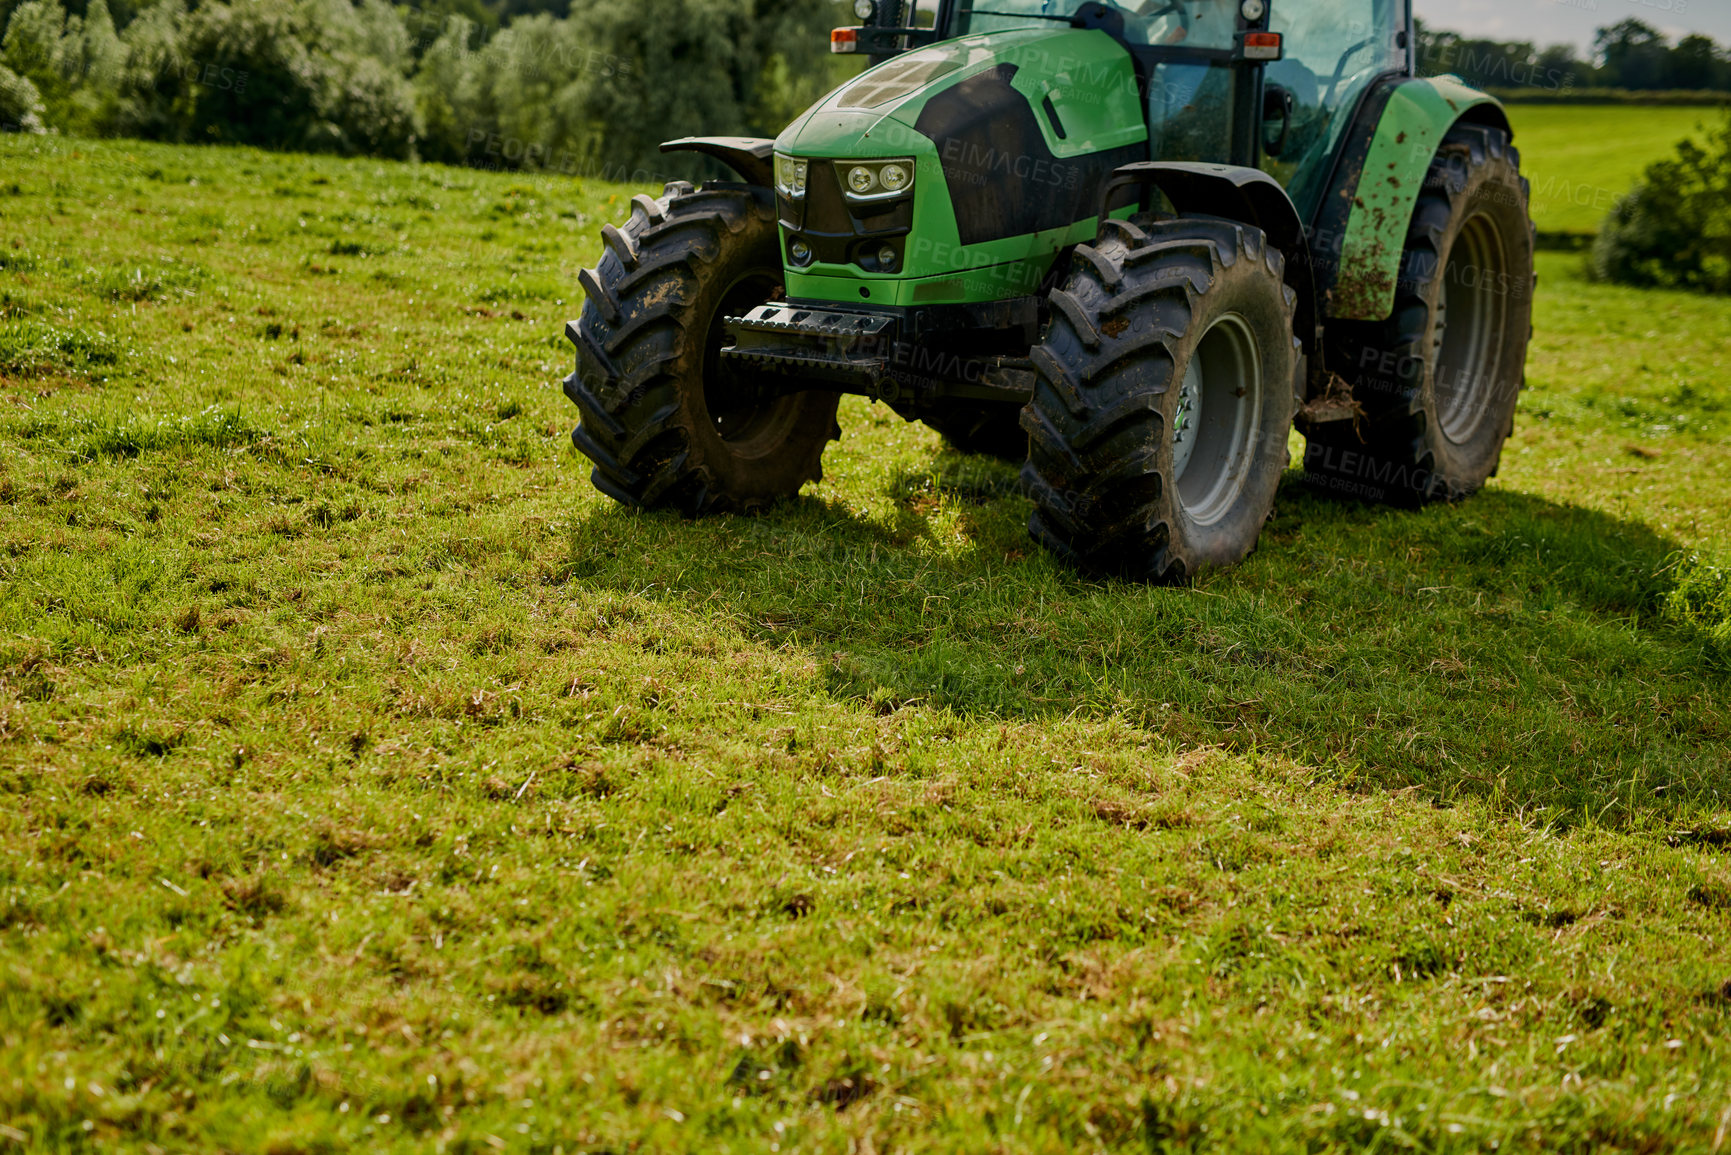 Buy stock photo High angle shot of a green tractor on an open piece of farmland